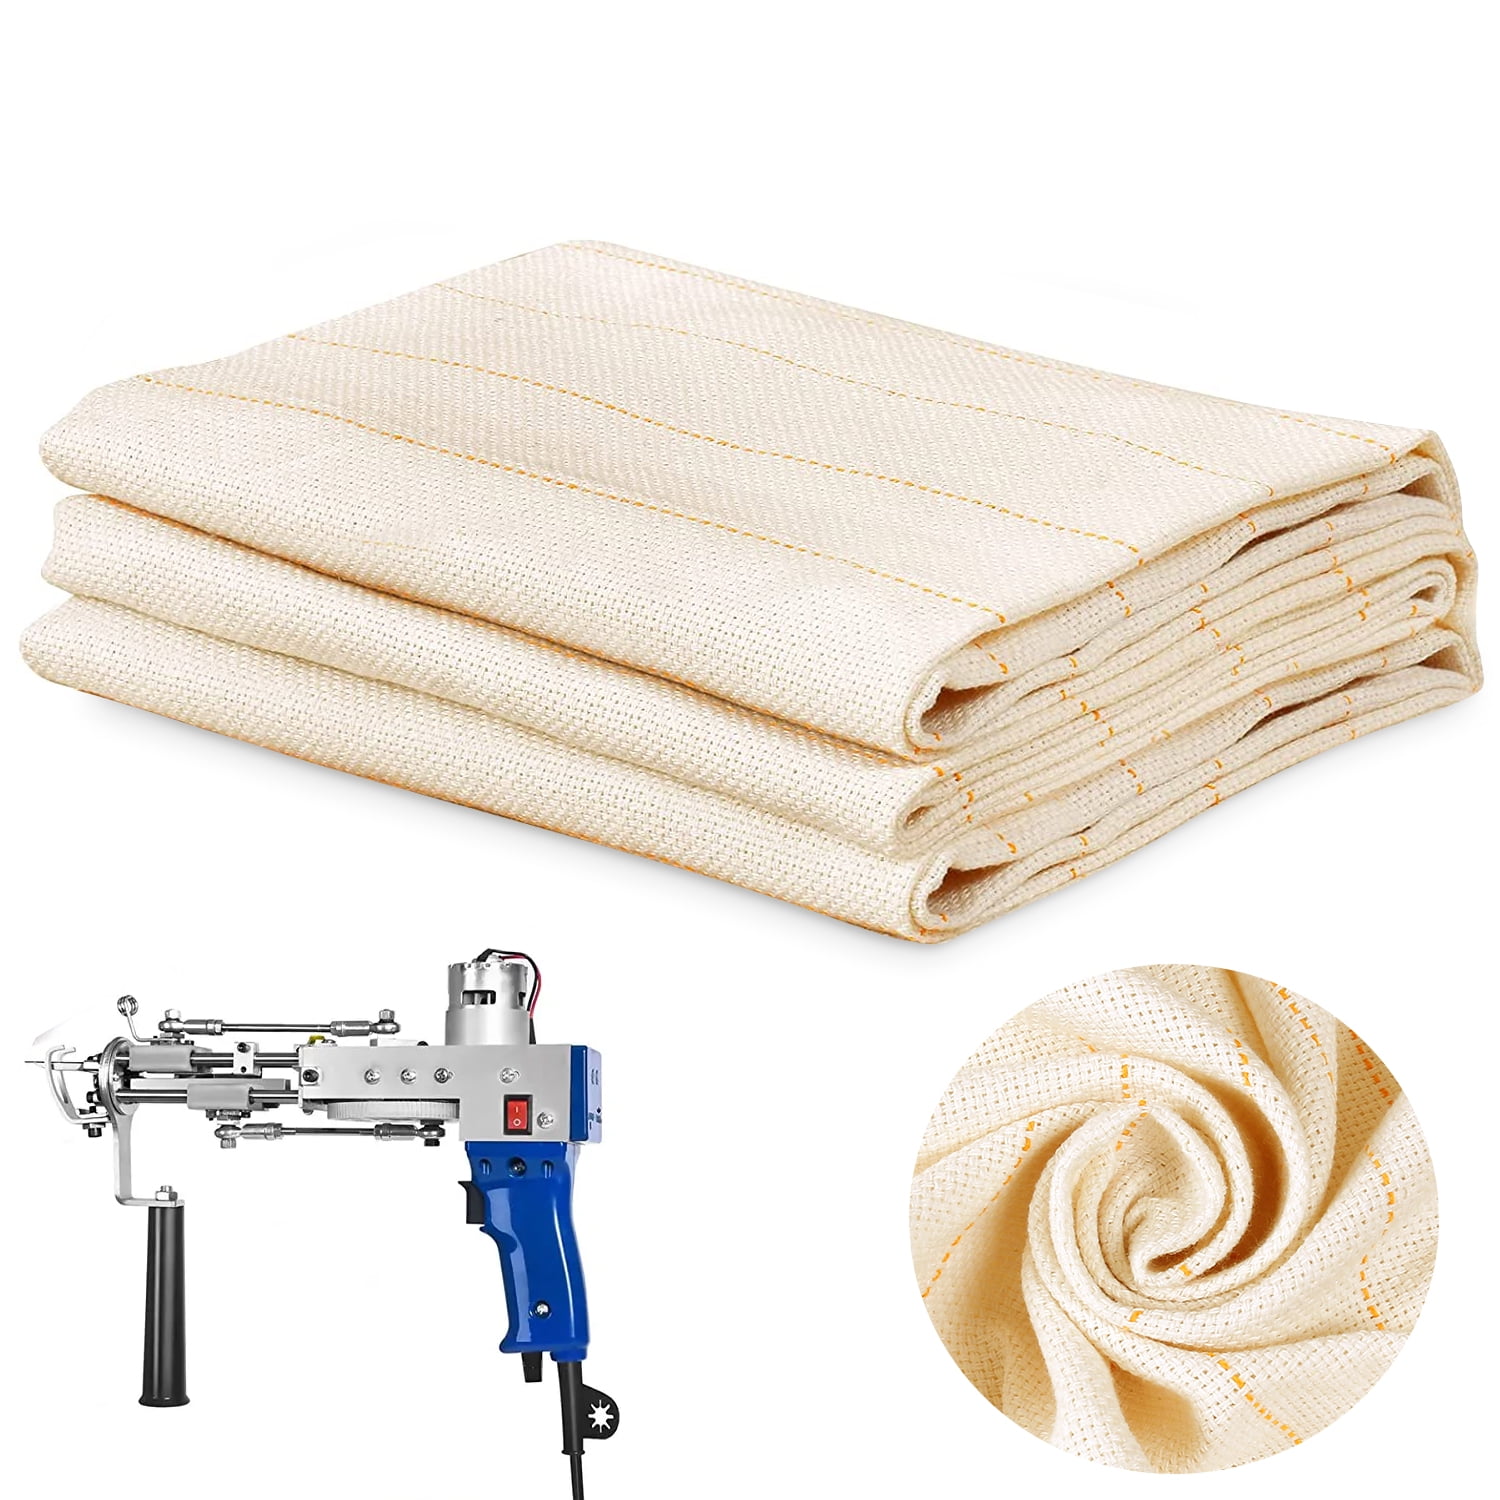  Aoibrloy 59 x 59 Tufting Cloth with Marked Lines, Punch  Needle Fabric for Punch Needle, Cut/Loop Pile Tufting Gun : Automotive